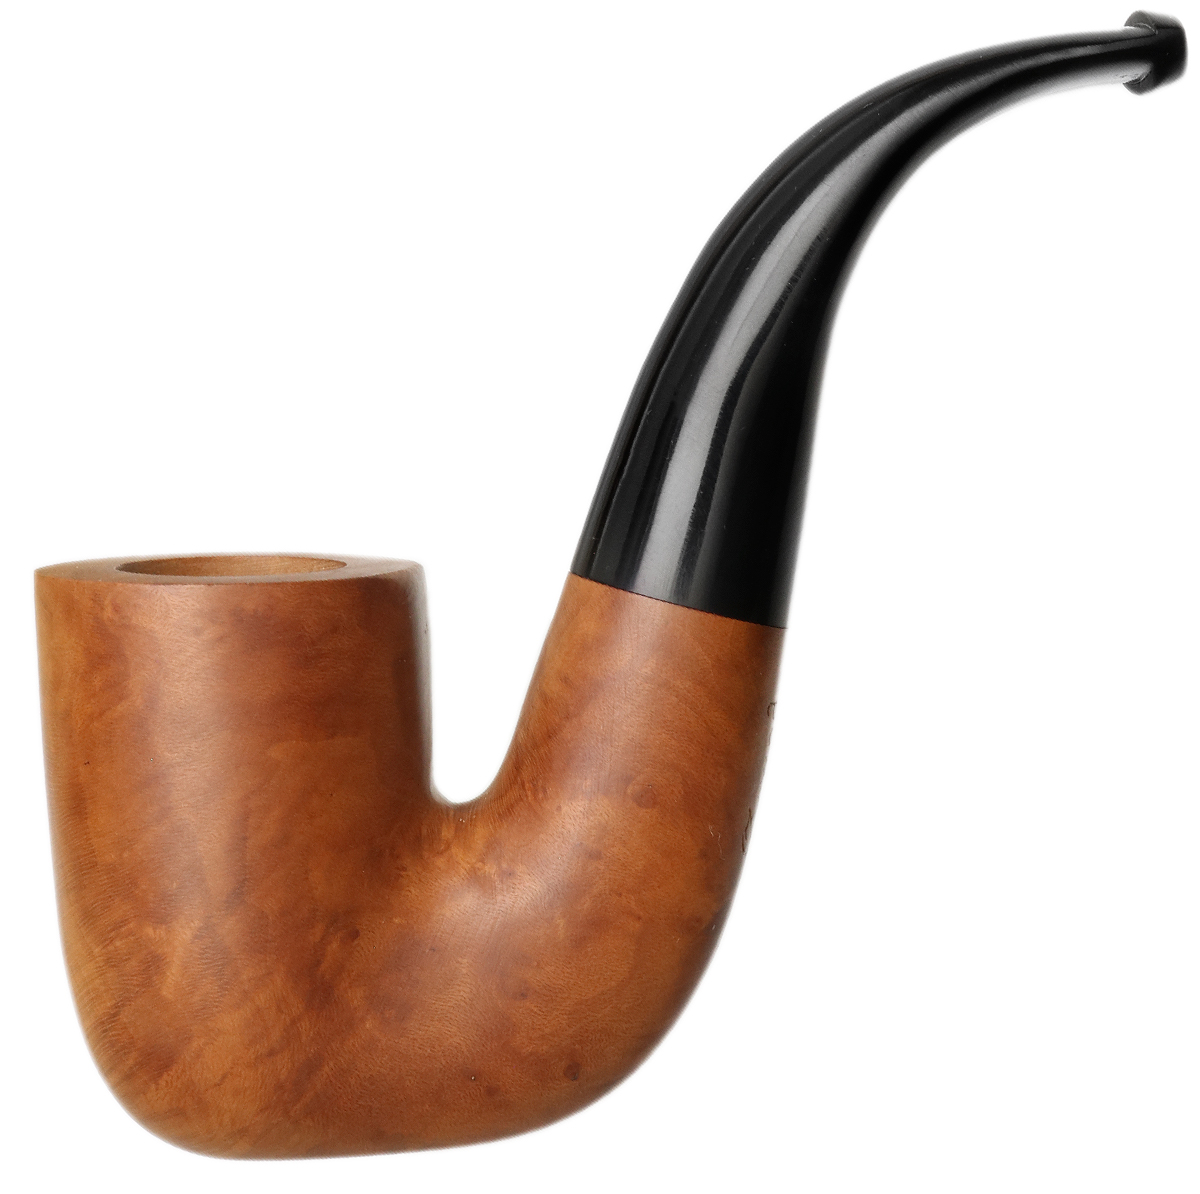 French Estates Genod Smooth Natural Oom Paul Unsmoked Buy French